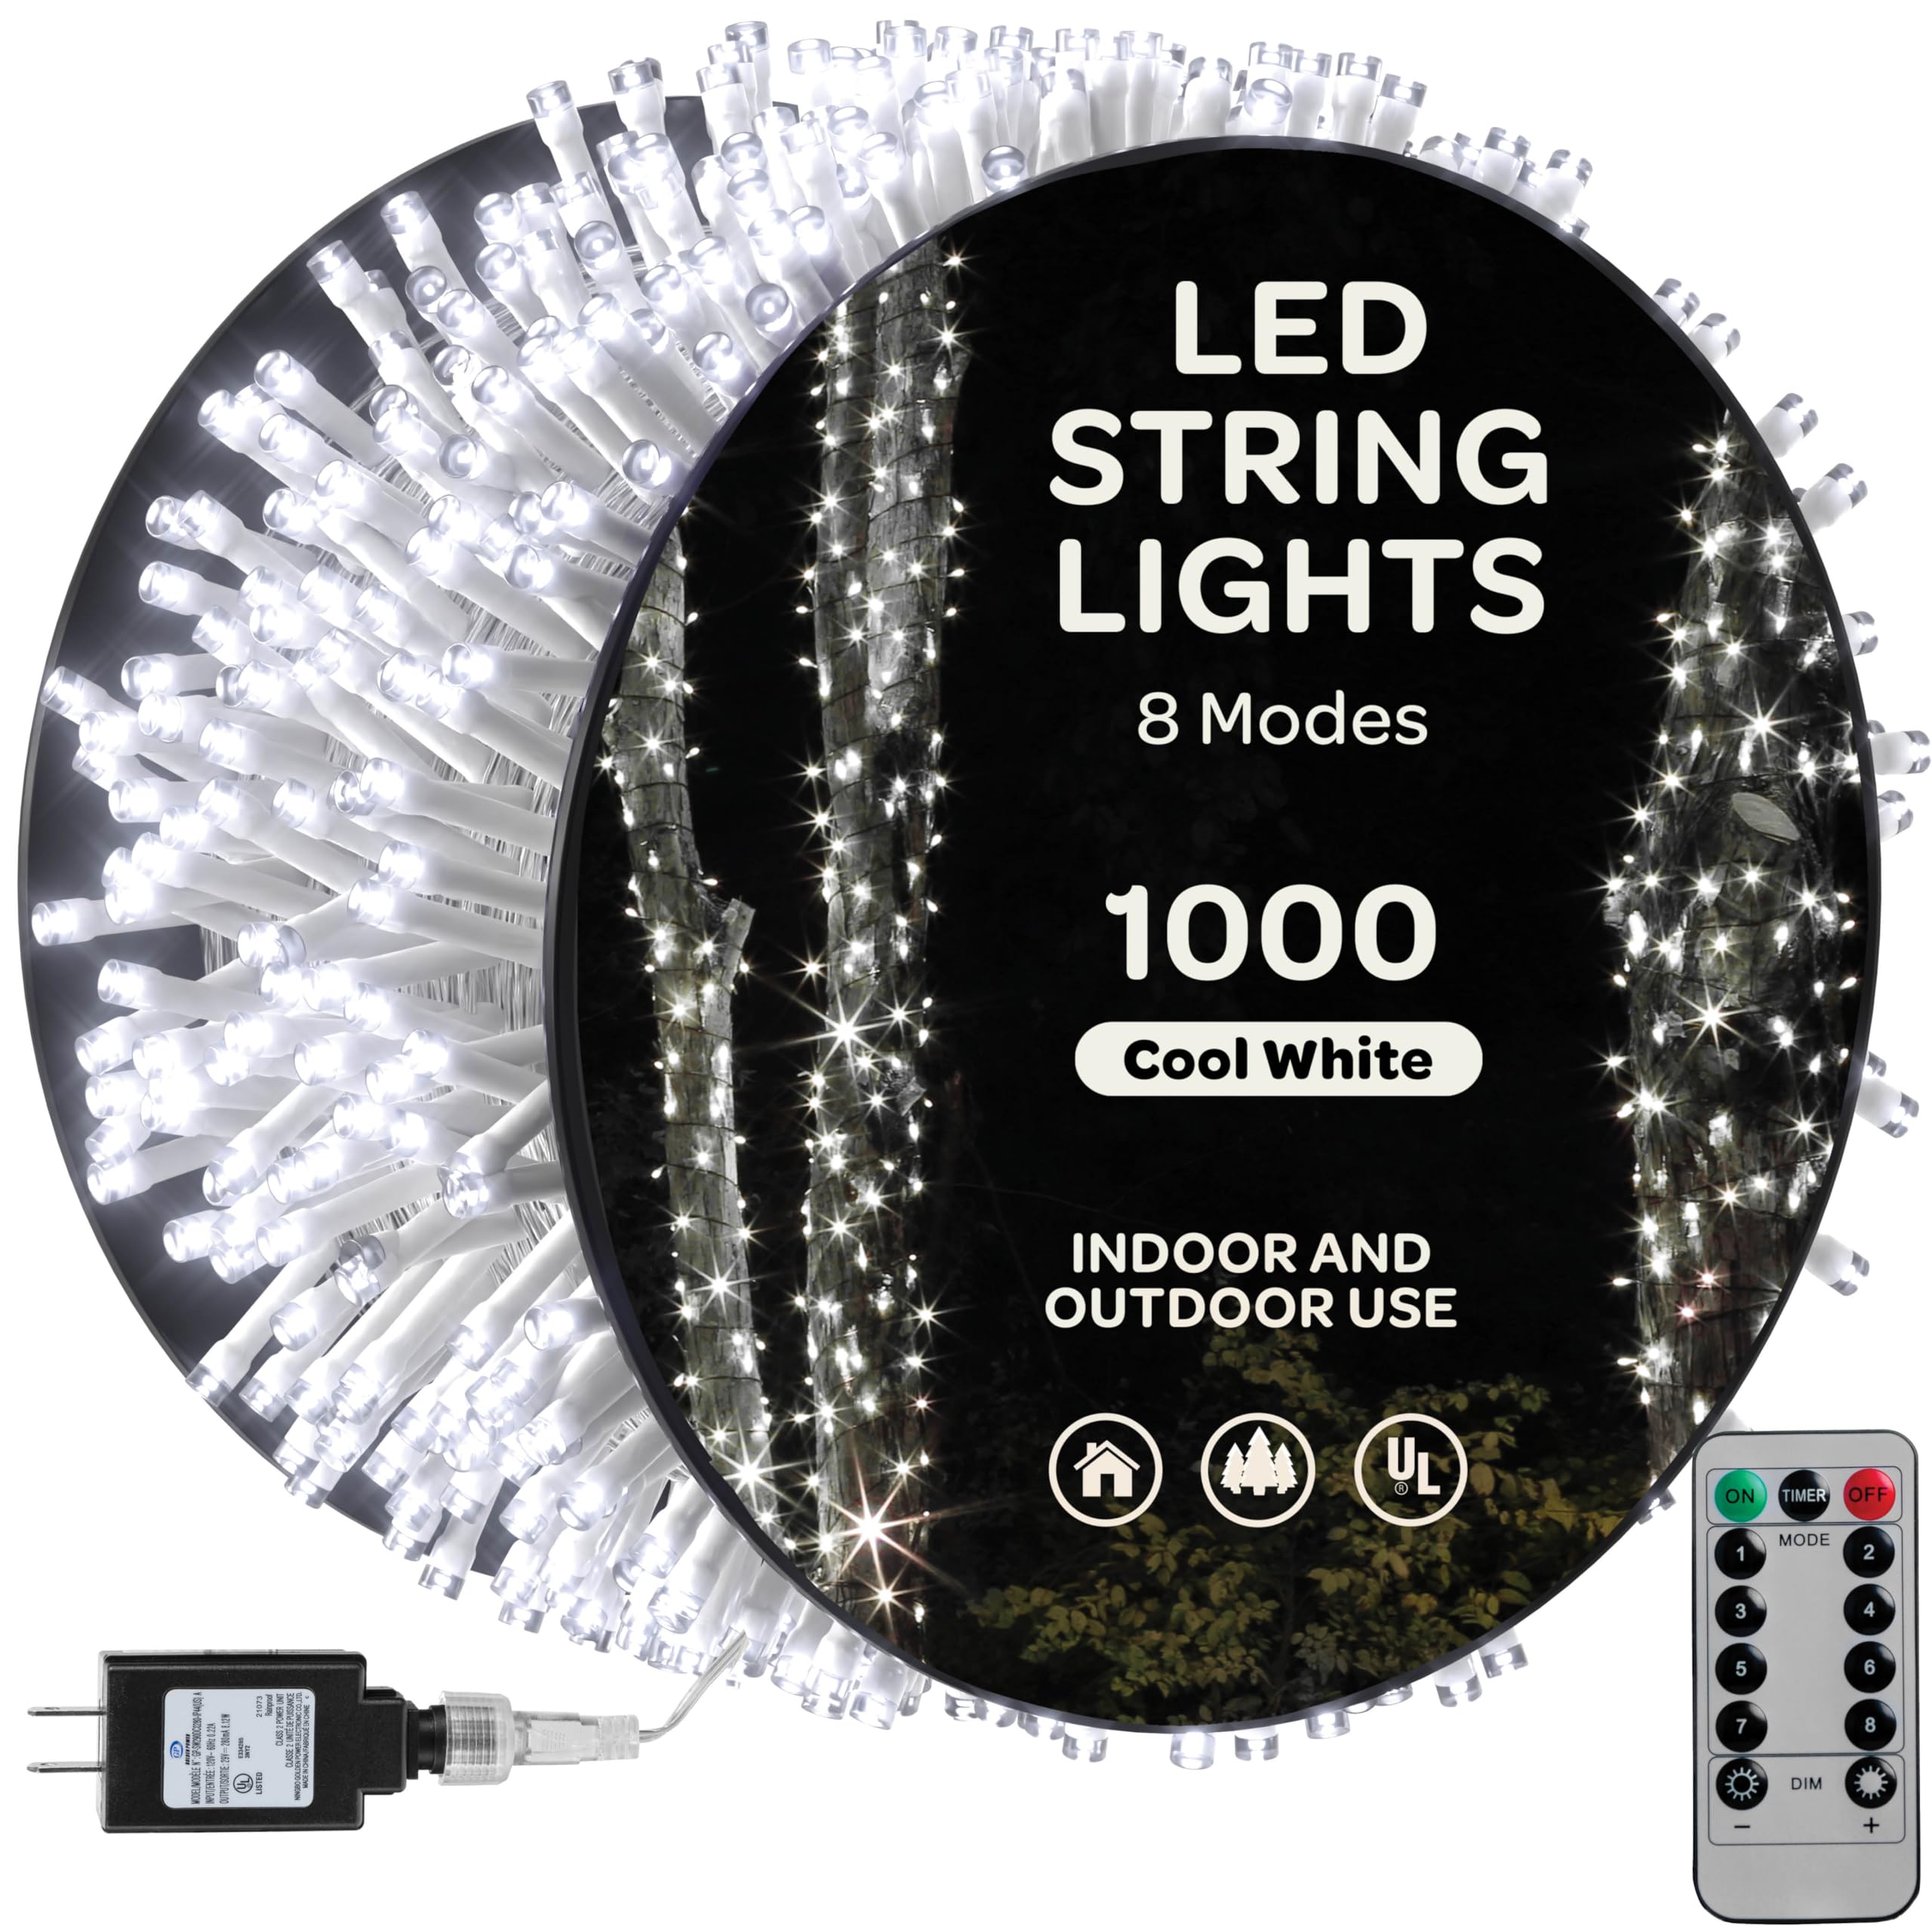 1000 LED Christmas Lights [Cool White] 400ft Super Long String Lights - Remote with 8 Modes/Timer/dimmable - UL Approved for Indoor/Outdoor Use - For Holiday/christmas/Party/Decorations (clear wire)